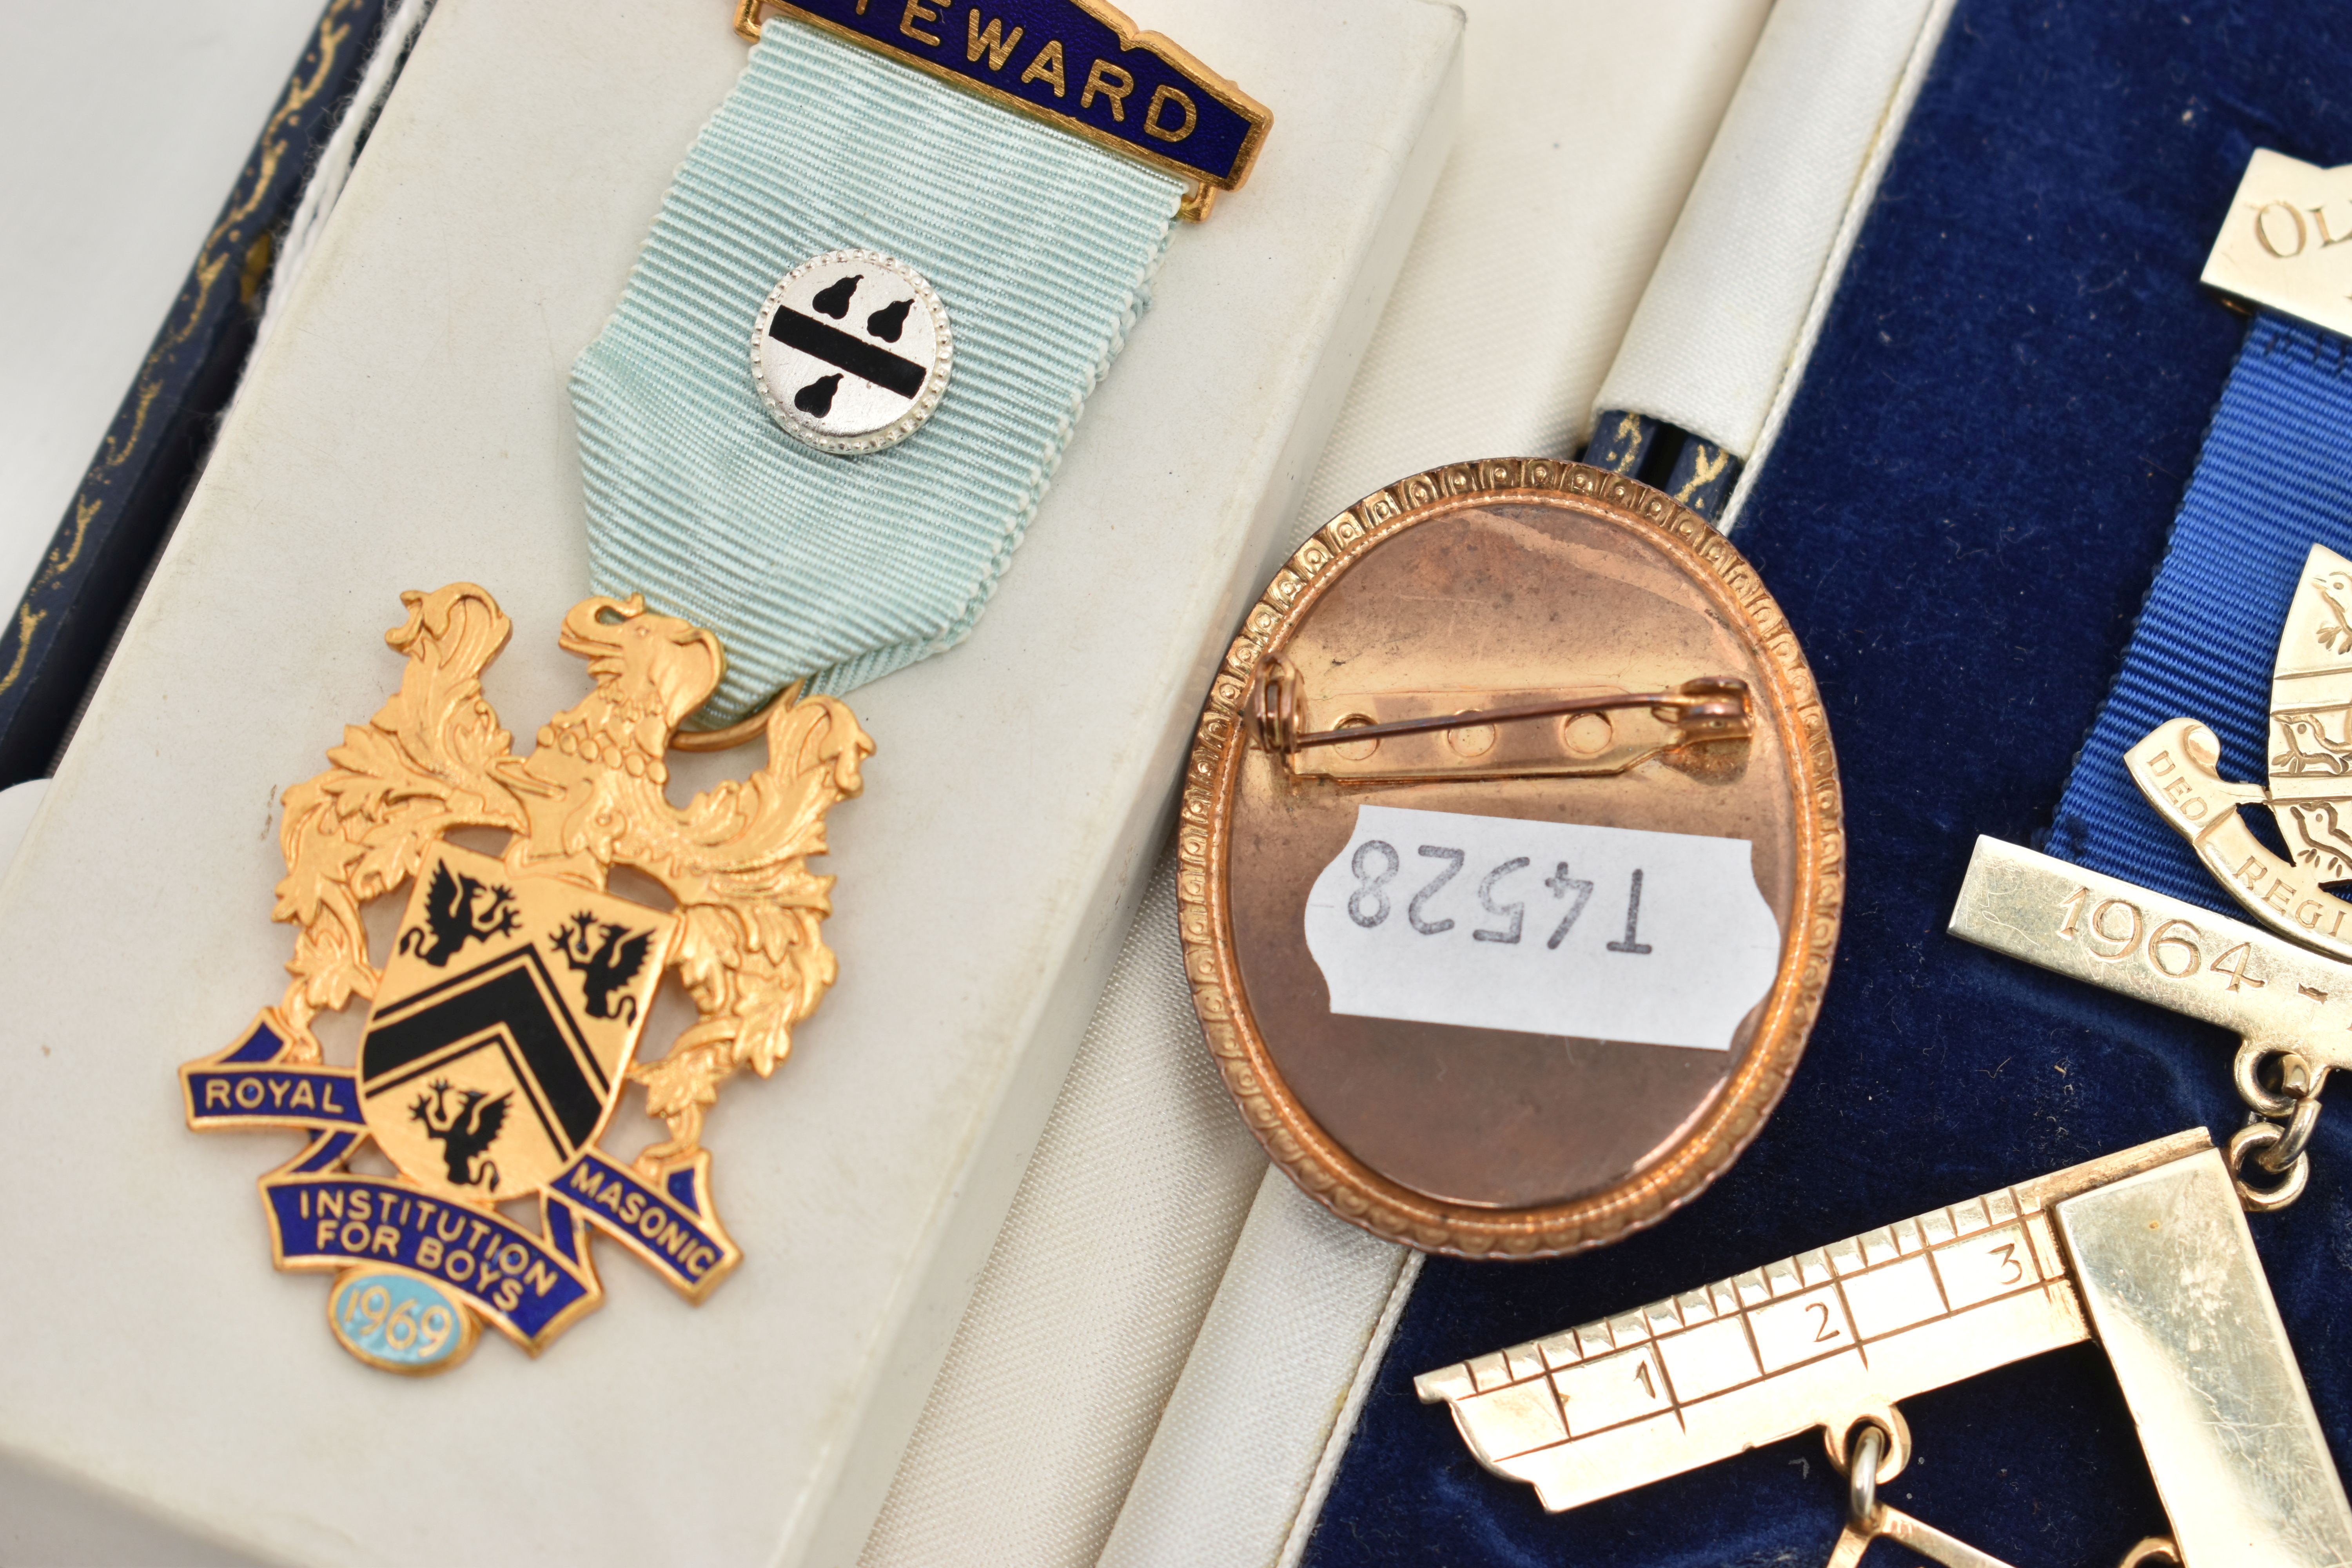 FOUR MASONIC ITEMS, to include a silver Irish Masonic past masters jewel suspended from ribbon, - Image 6 of 6